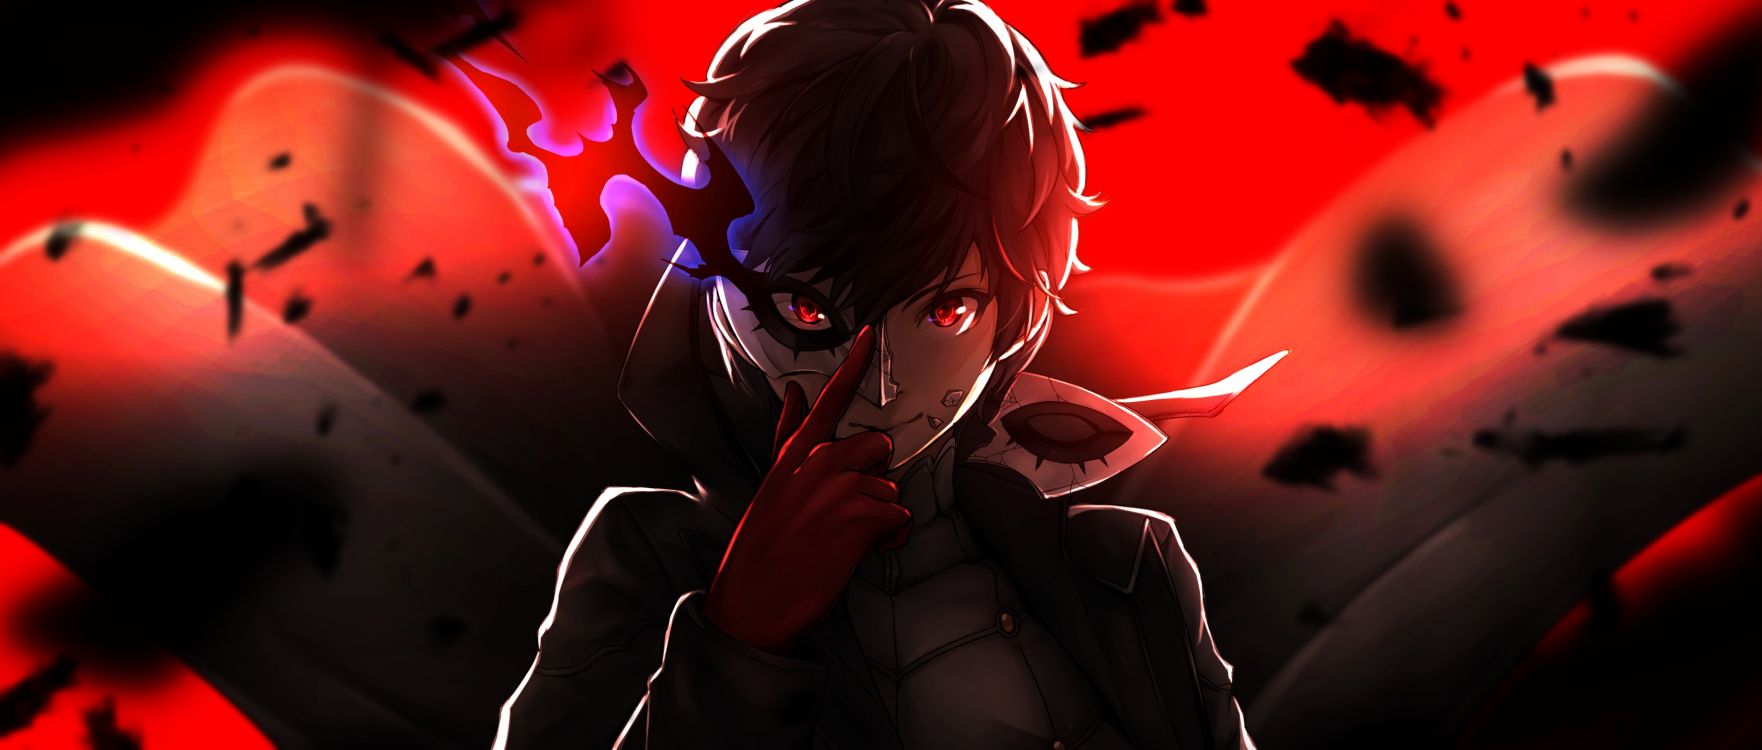 Wallpaper Persona 5 Art Entertainment Darkness Event Background Download Free Image